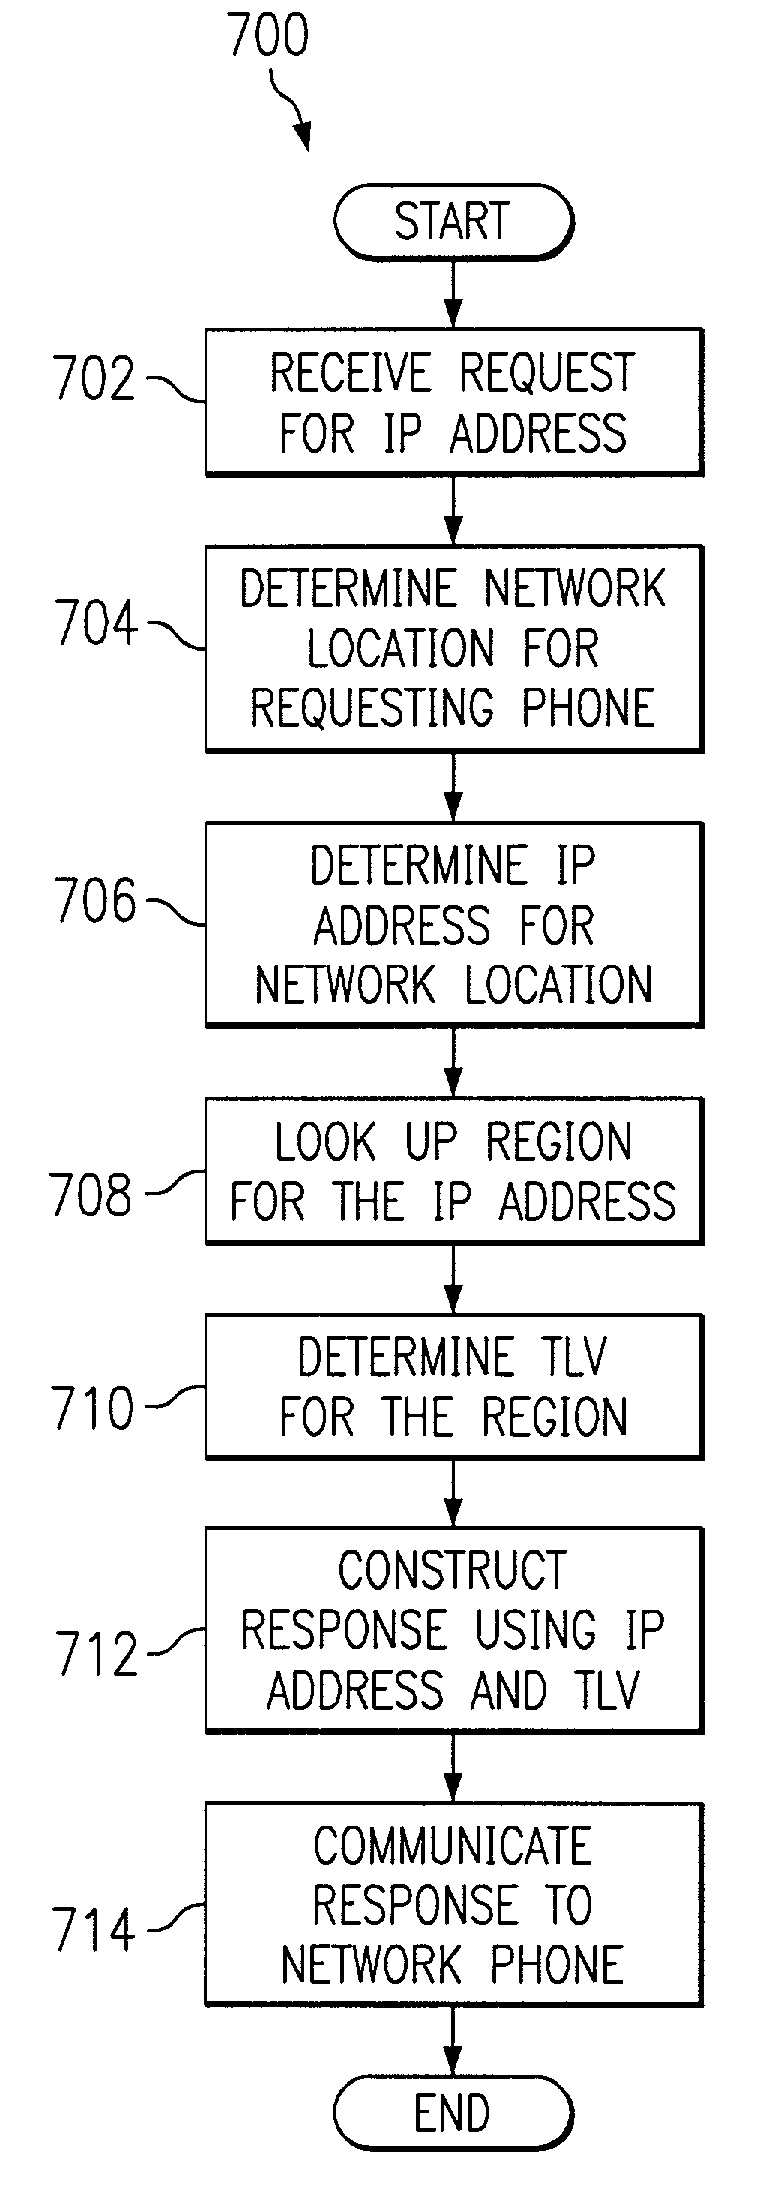 Method and apparatus for dynamically assigning a network endpoint to a network region for selecting a proper codec